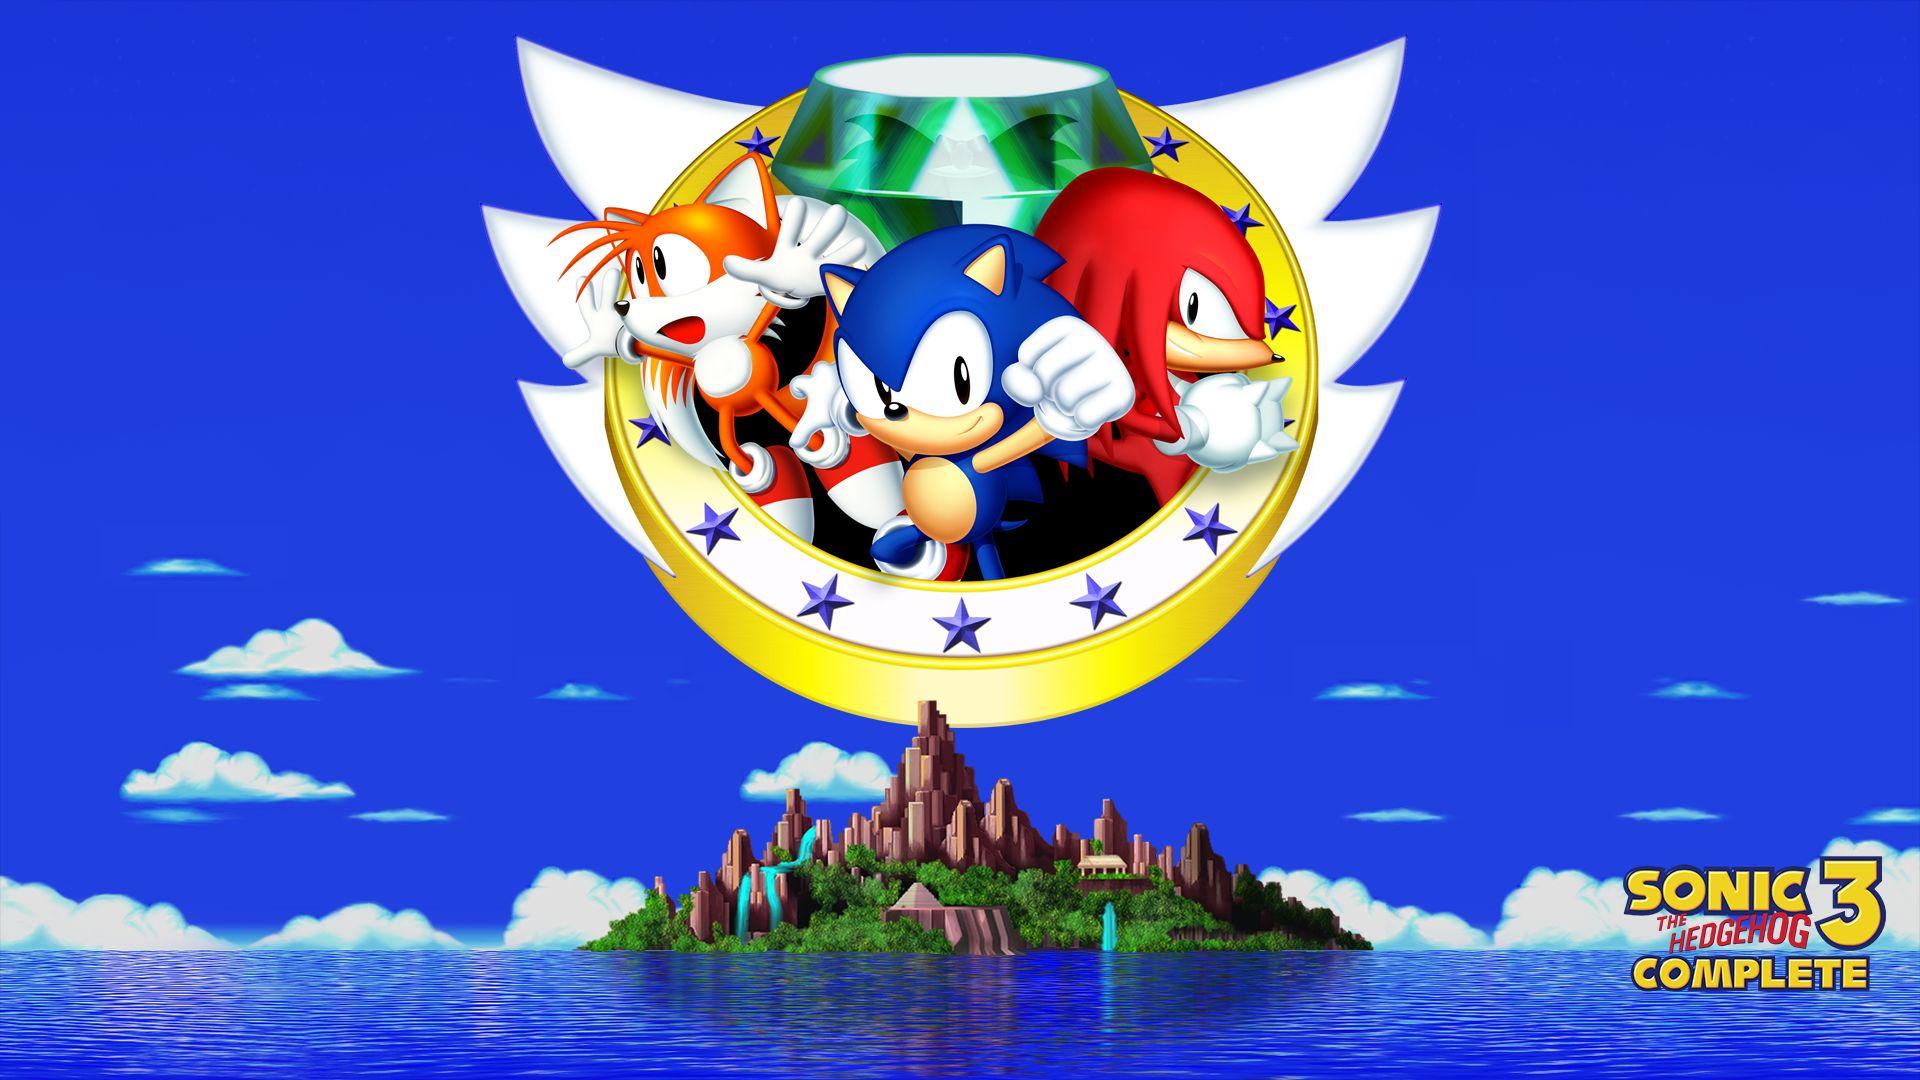 Sonic the Hedgehog 3 HD Wallpaper and Background